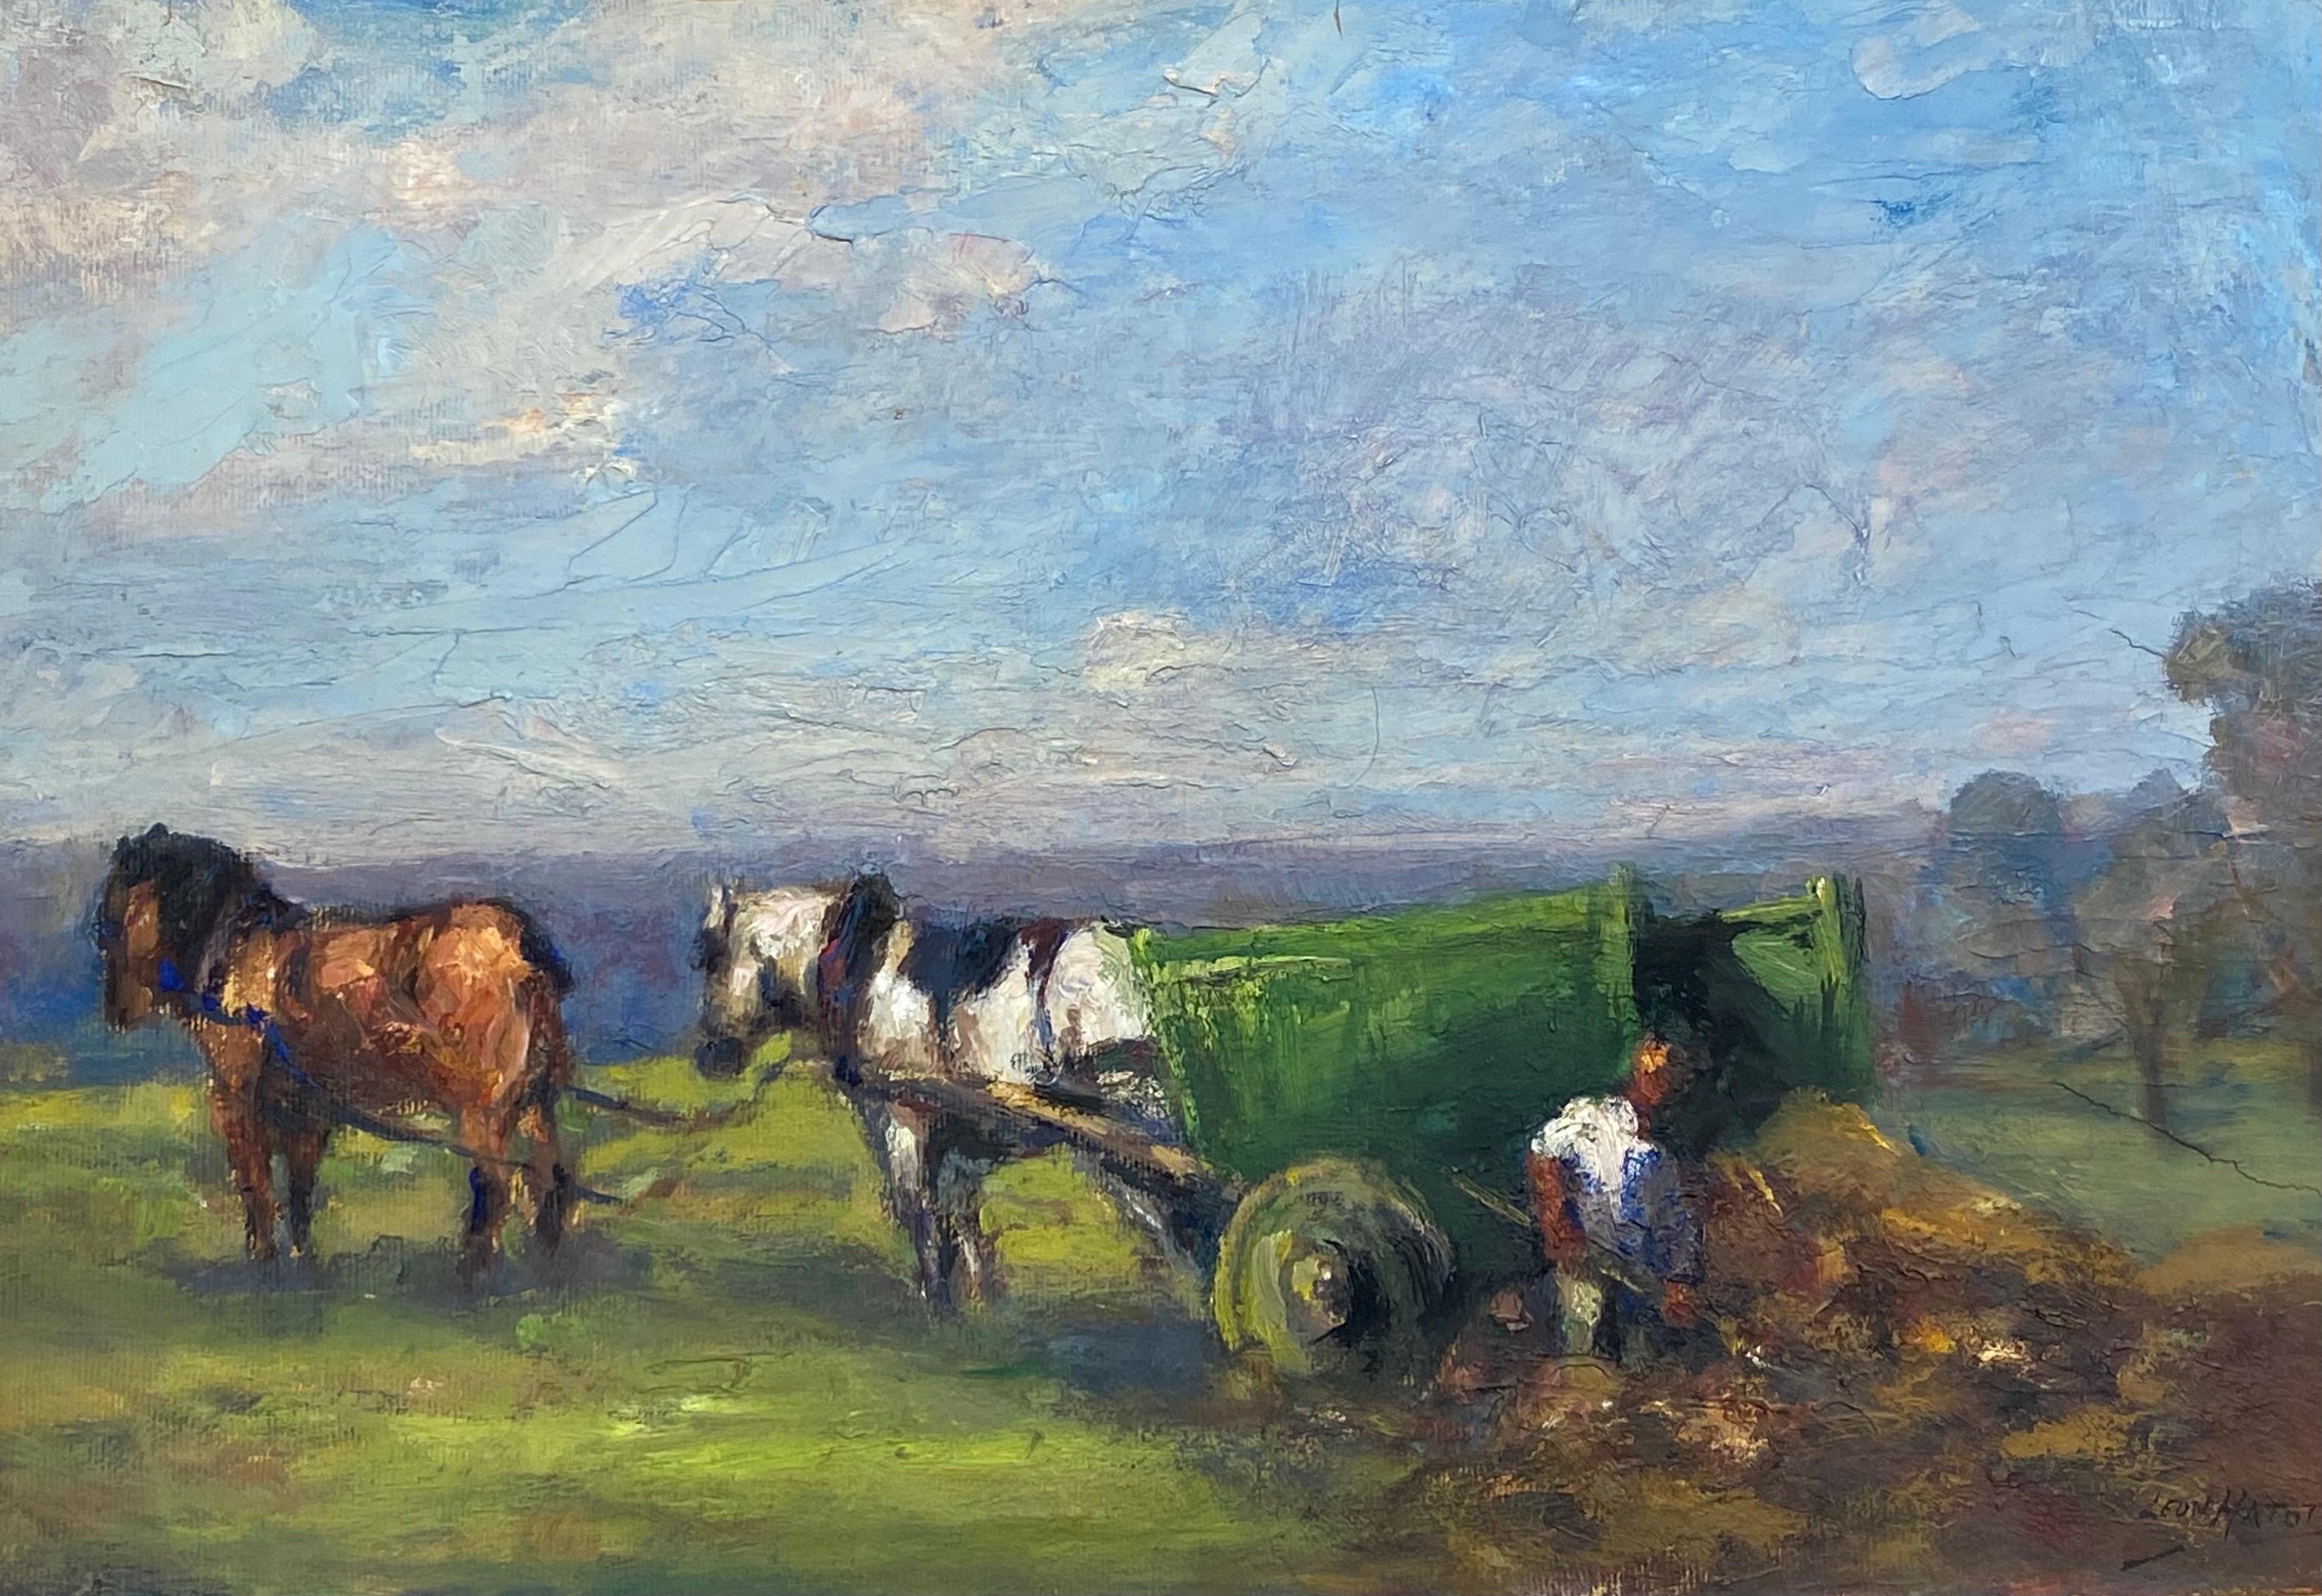 Leon Hatot Landscape Painting - Antique Signed French Impressionist Oil - Farmer Horses & Cart on Land